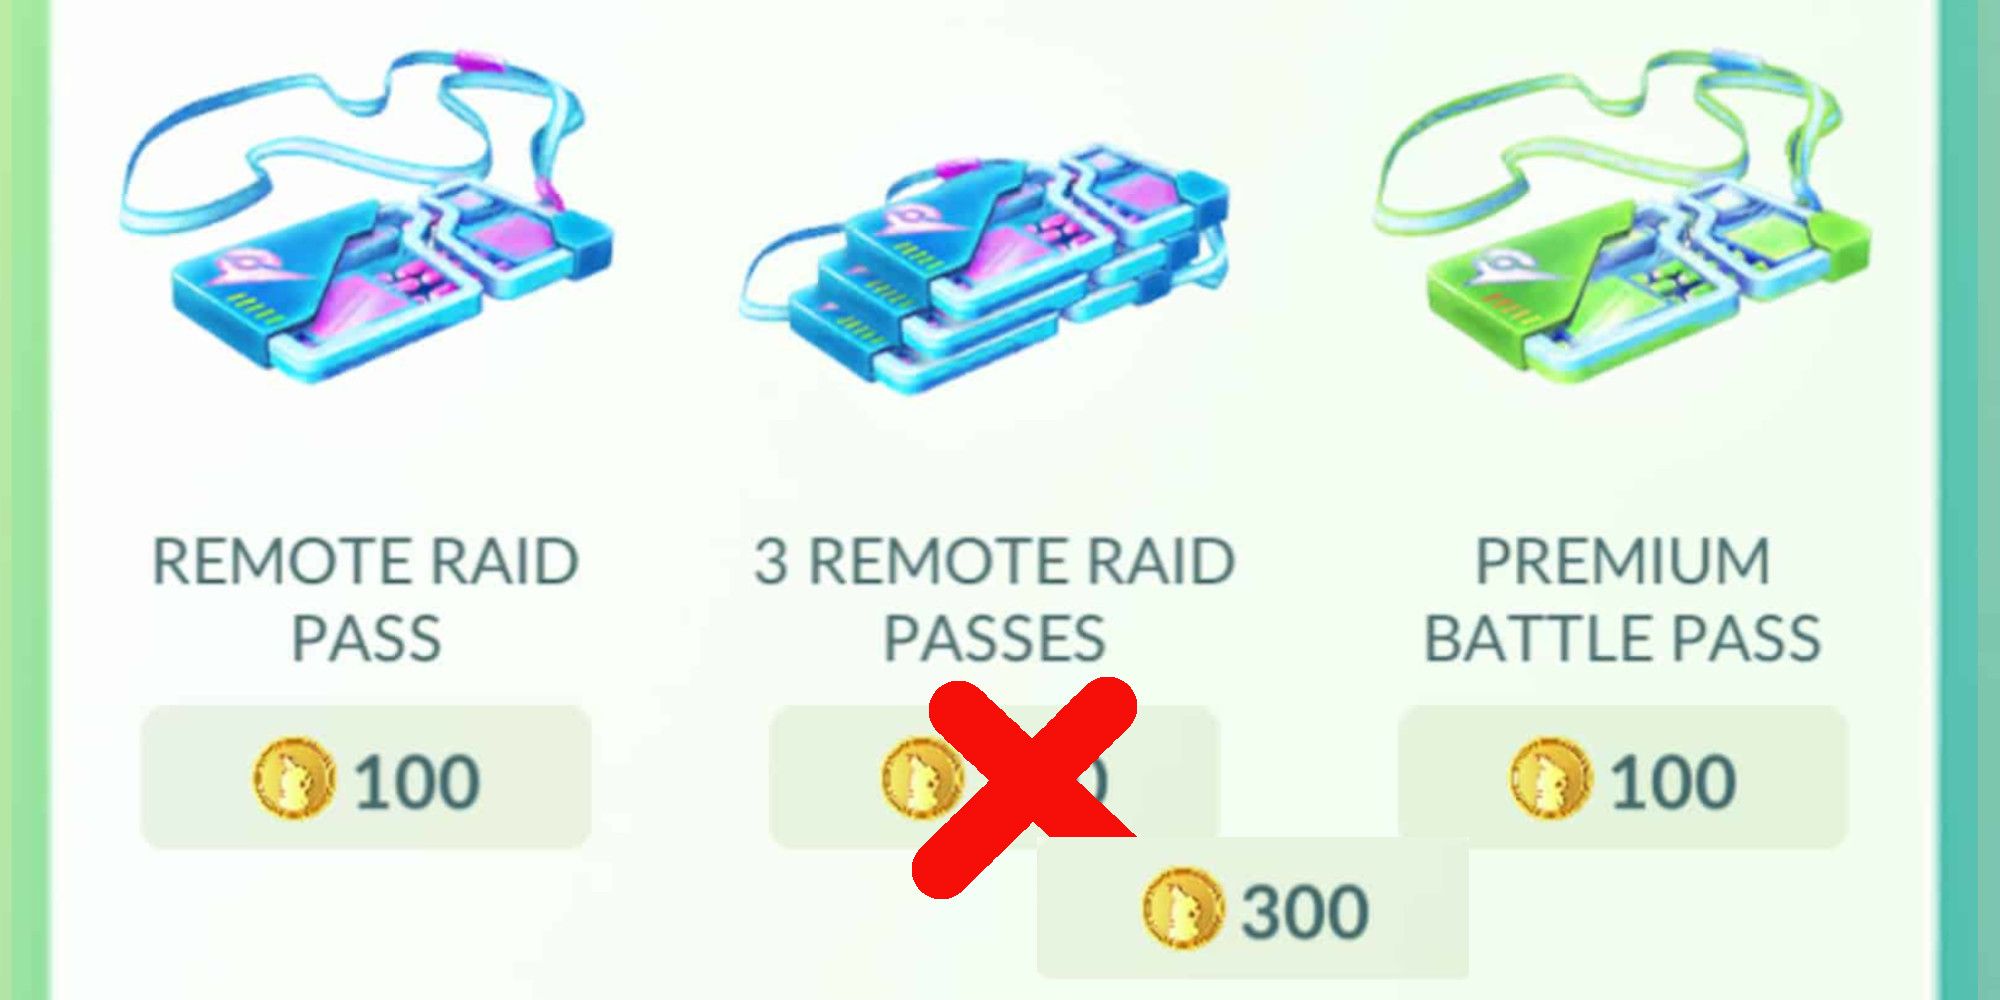 After the Remote Pass nerf, Pokémon Go moves forward with Shadow Raids